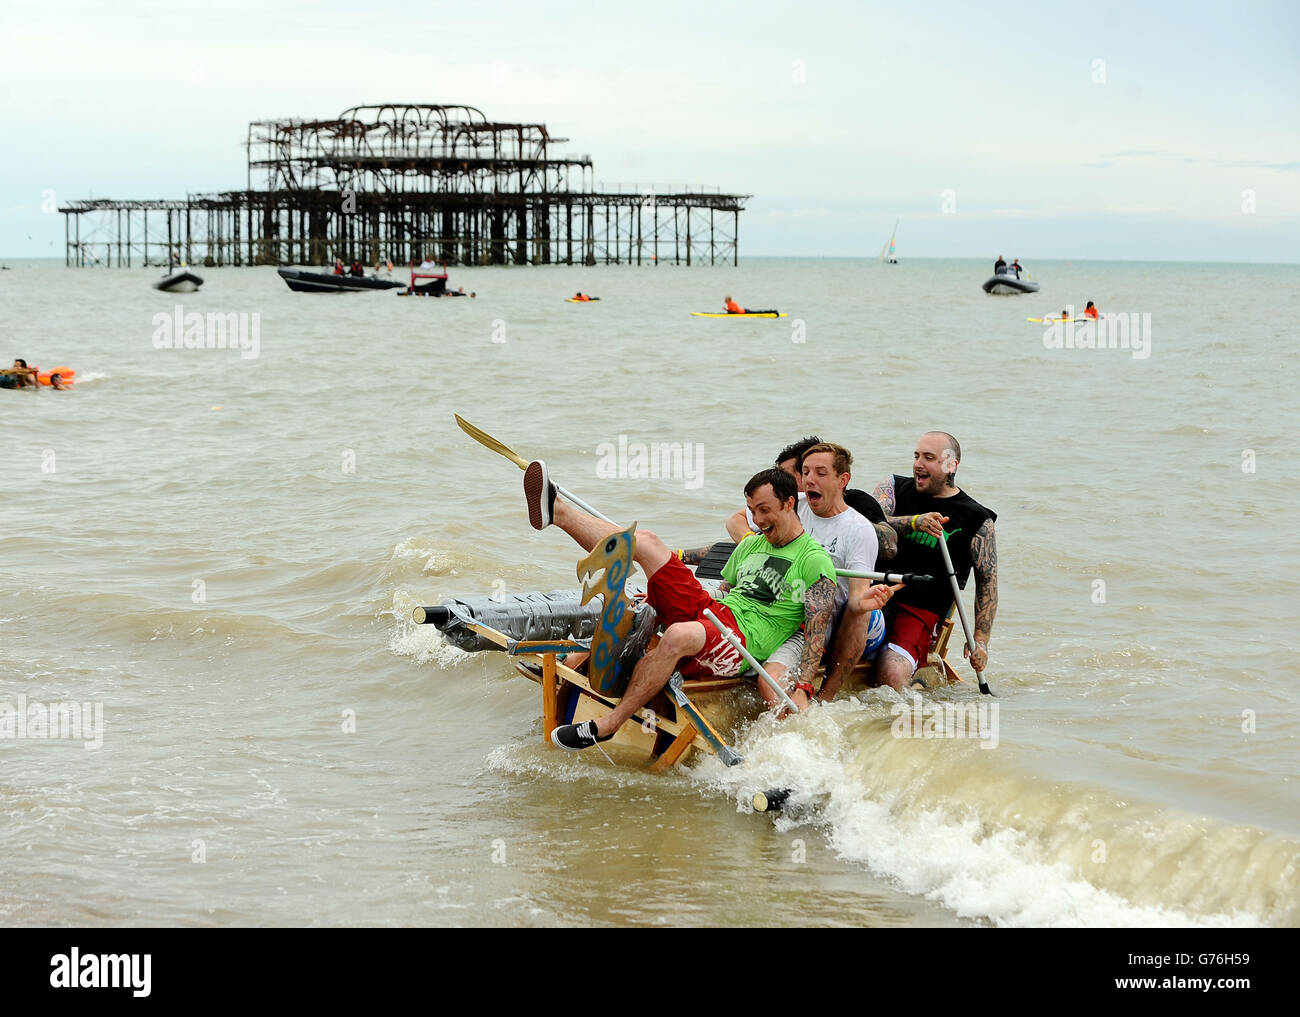 Competitors take part in the 'Paddle Something Unusual' event at the Paddle Round The Pier Beach Festival in Brighton. Stock Photo